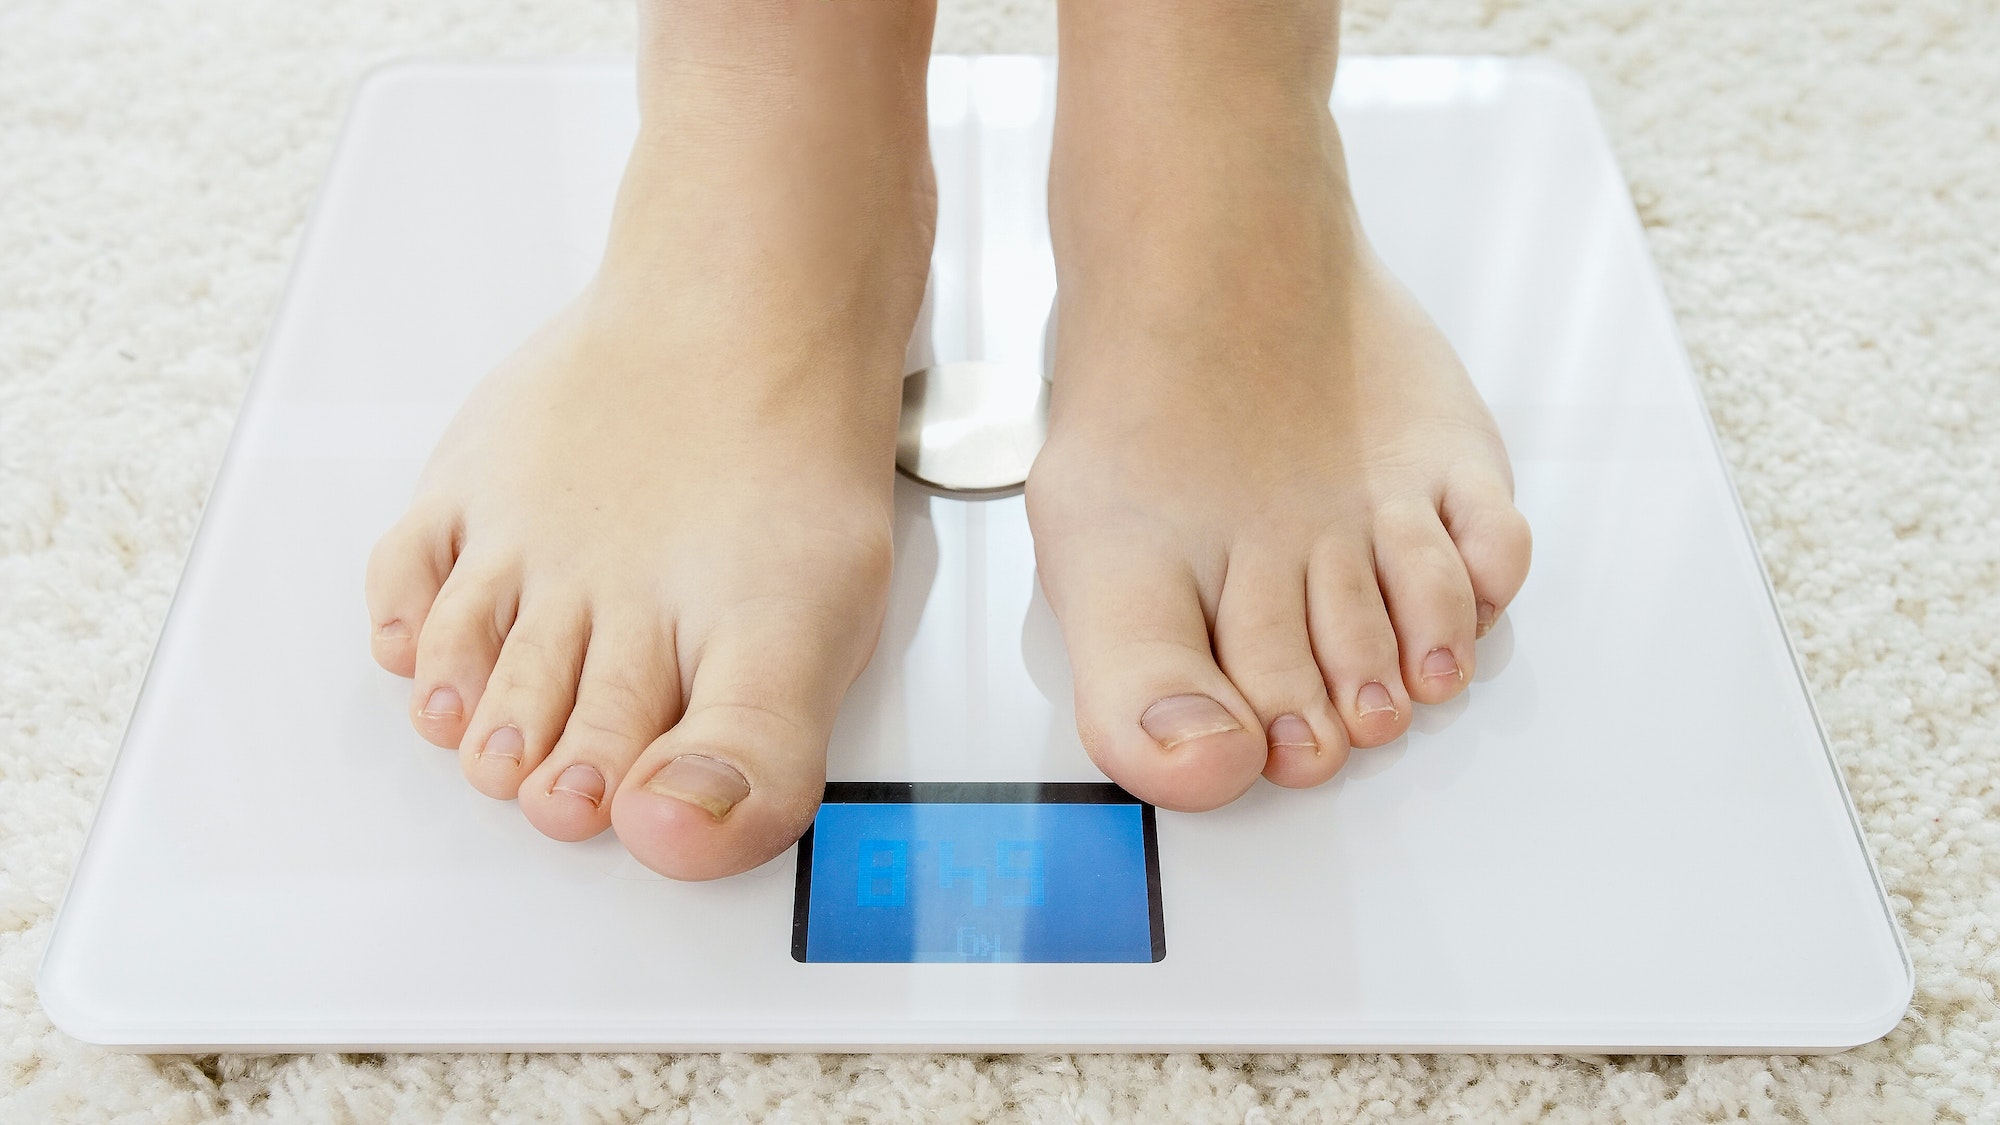 Closeup of barefoot woman using digital scales and checking her weight. Concept of dieting, loosing